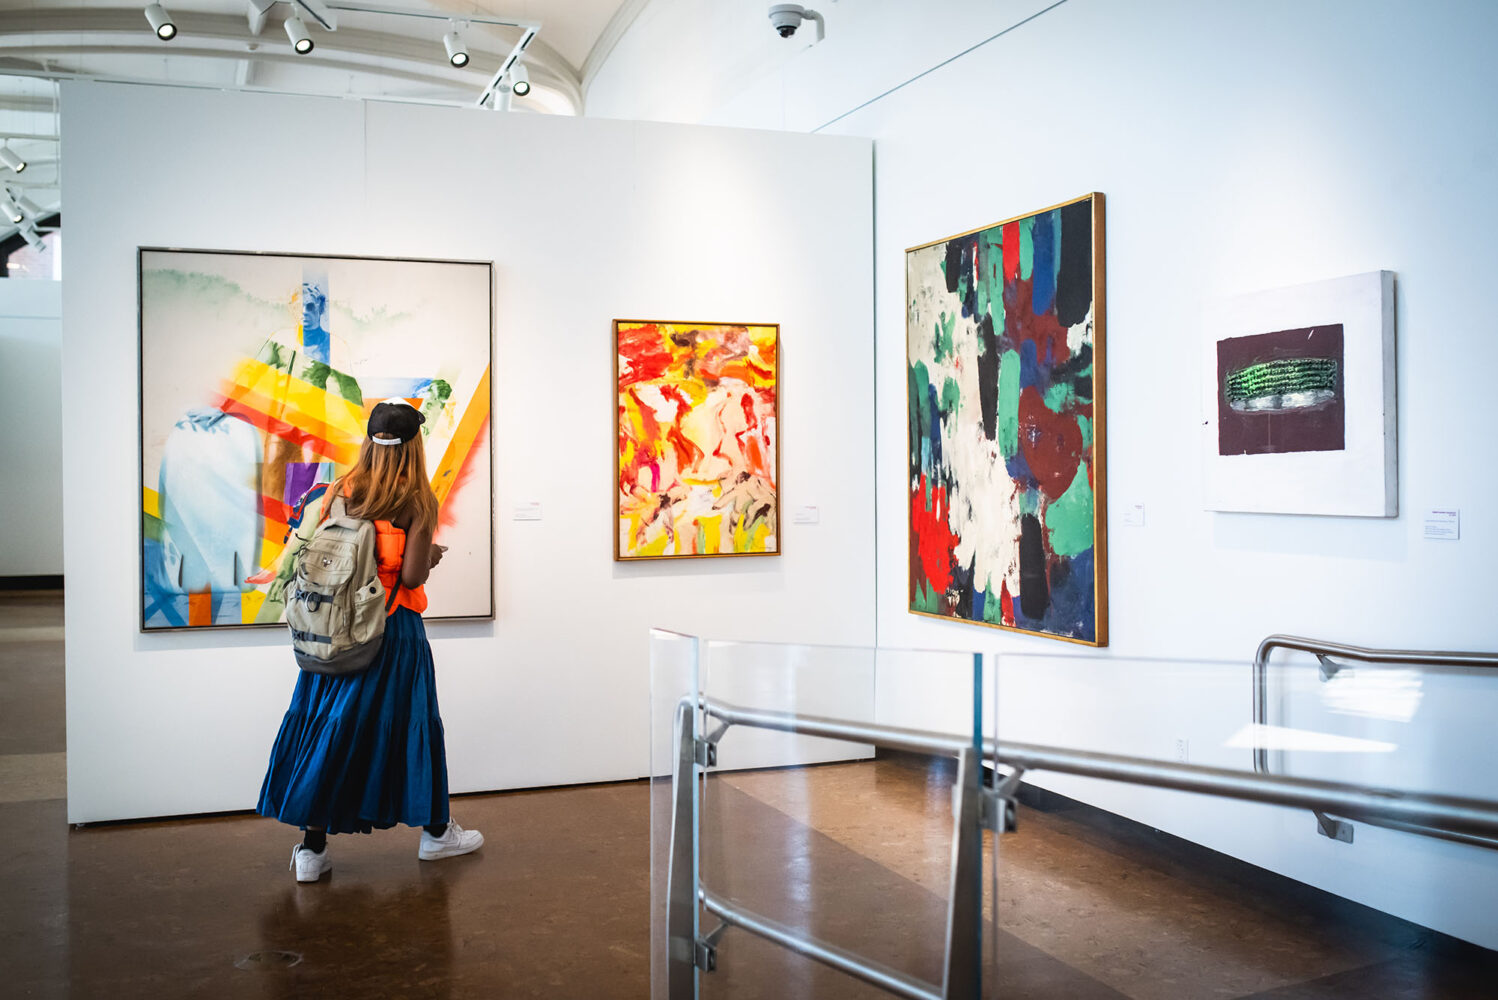 Photo: A large, white gallery wall features large paintings from various artists. A person is showing walking through and looking at different pieces.